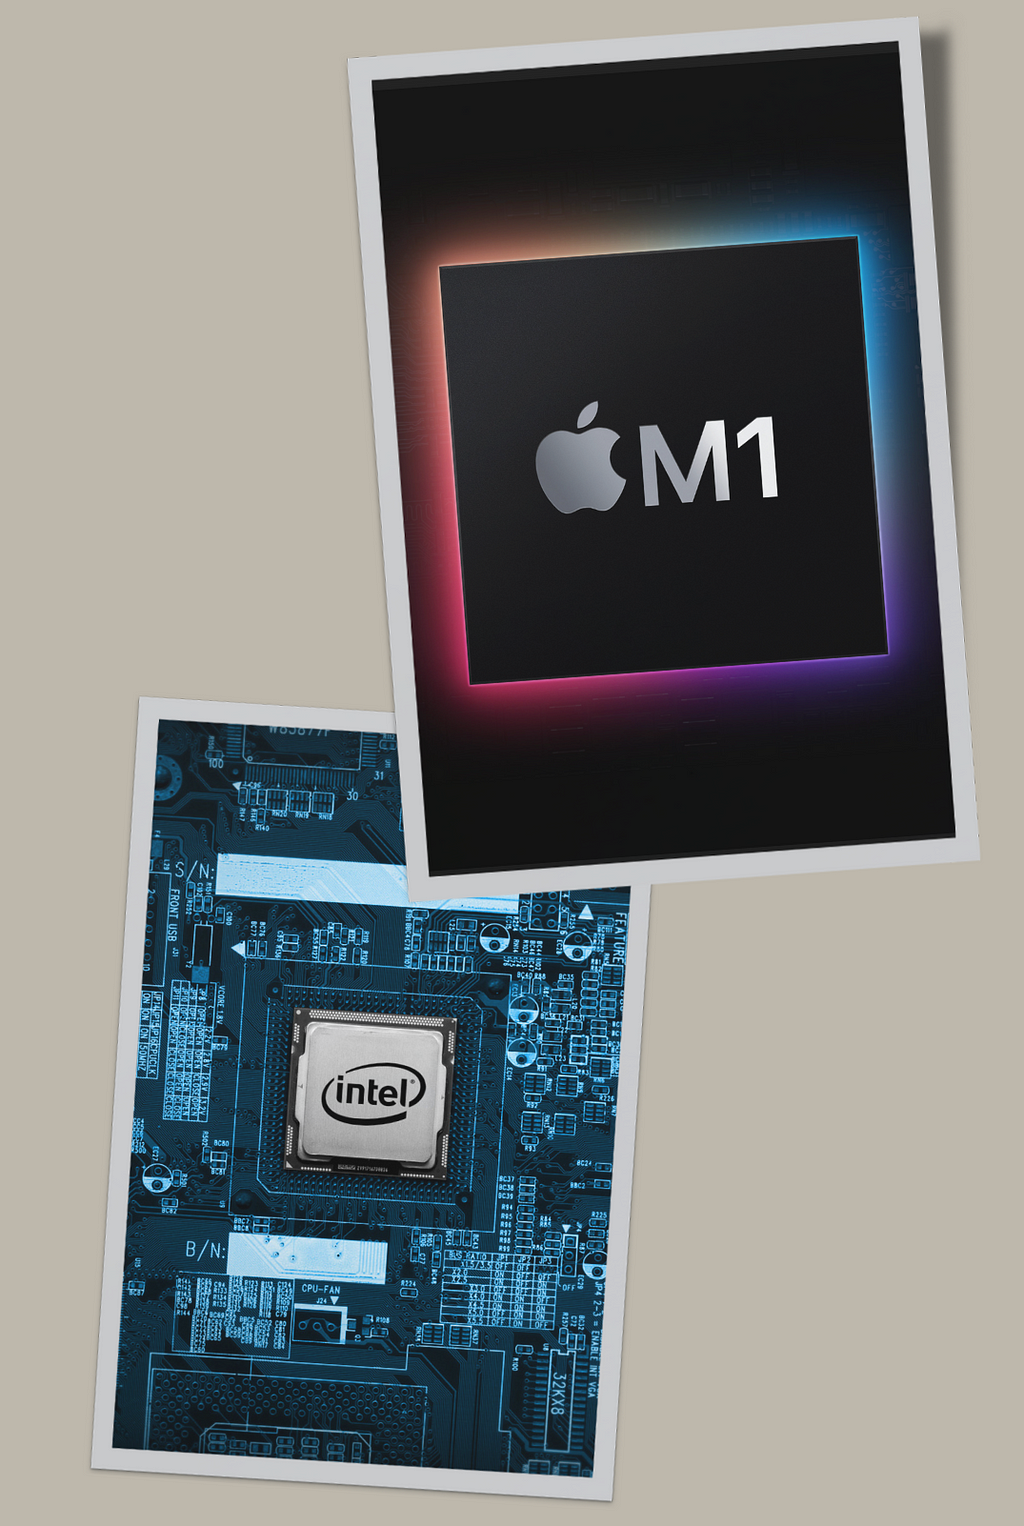 Image of M1 chip and Intel chip